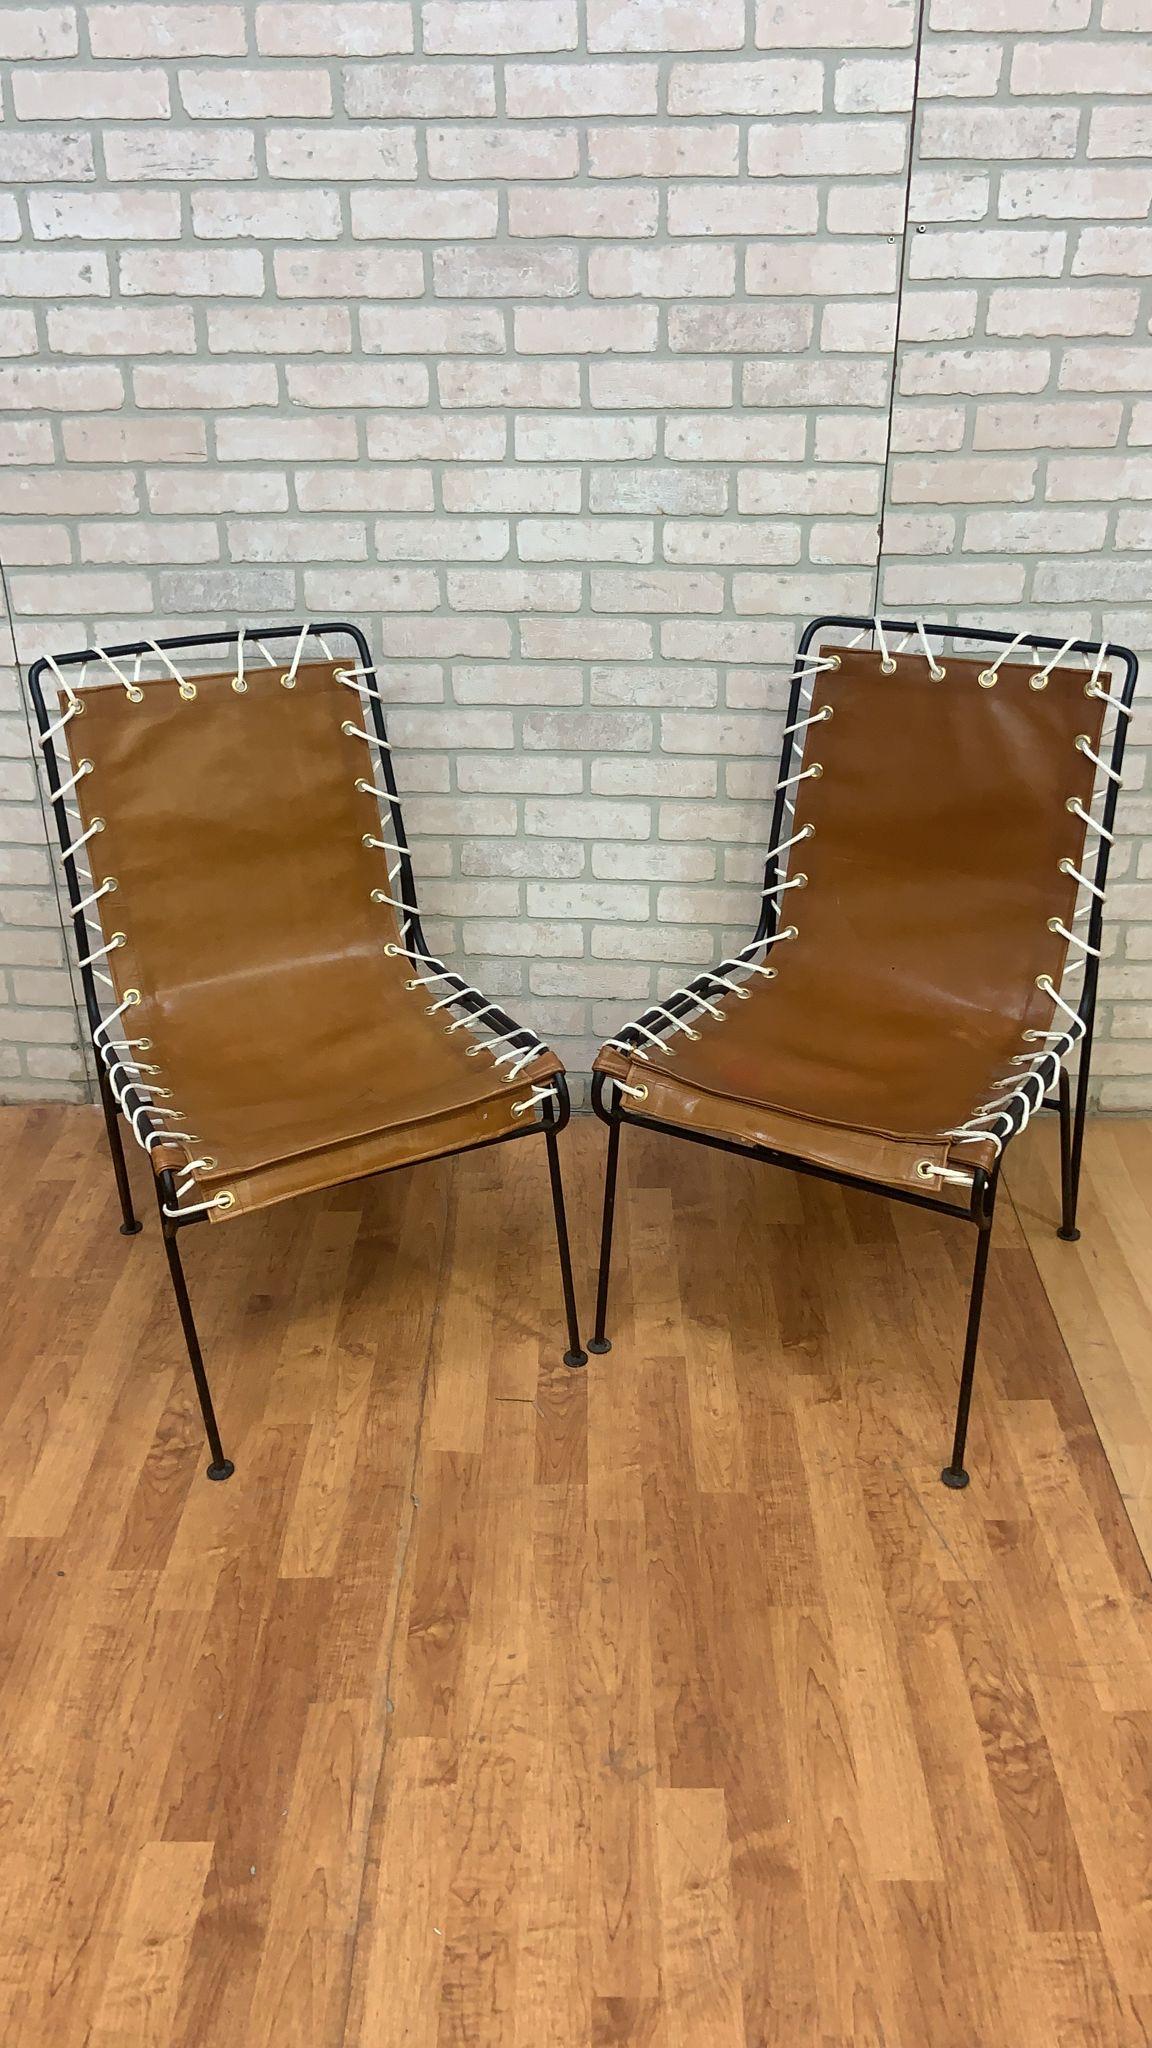 Mid Century Modern Pipsan Saarinen Swanson for Ficks Reed Wrought Iron “Sol-Air” Lounge Patio Sling Chairs Newly Upholstered - Pair

Great modernist design from the Sol-Air Series furniture for Ficks Reed, by the Saarinen Swanson Design team. This